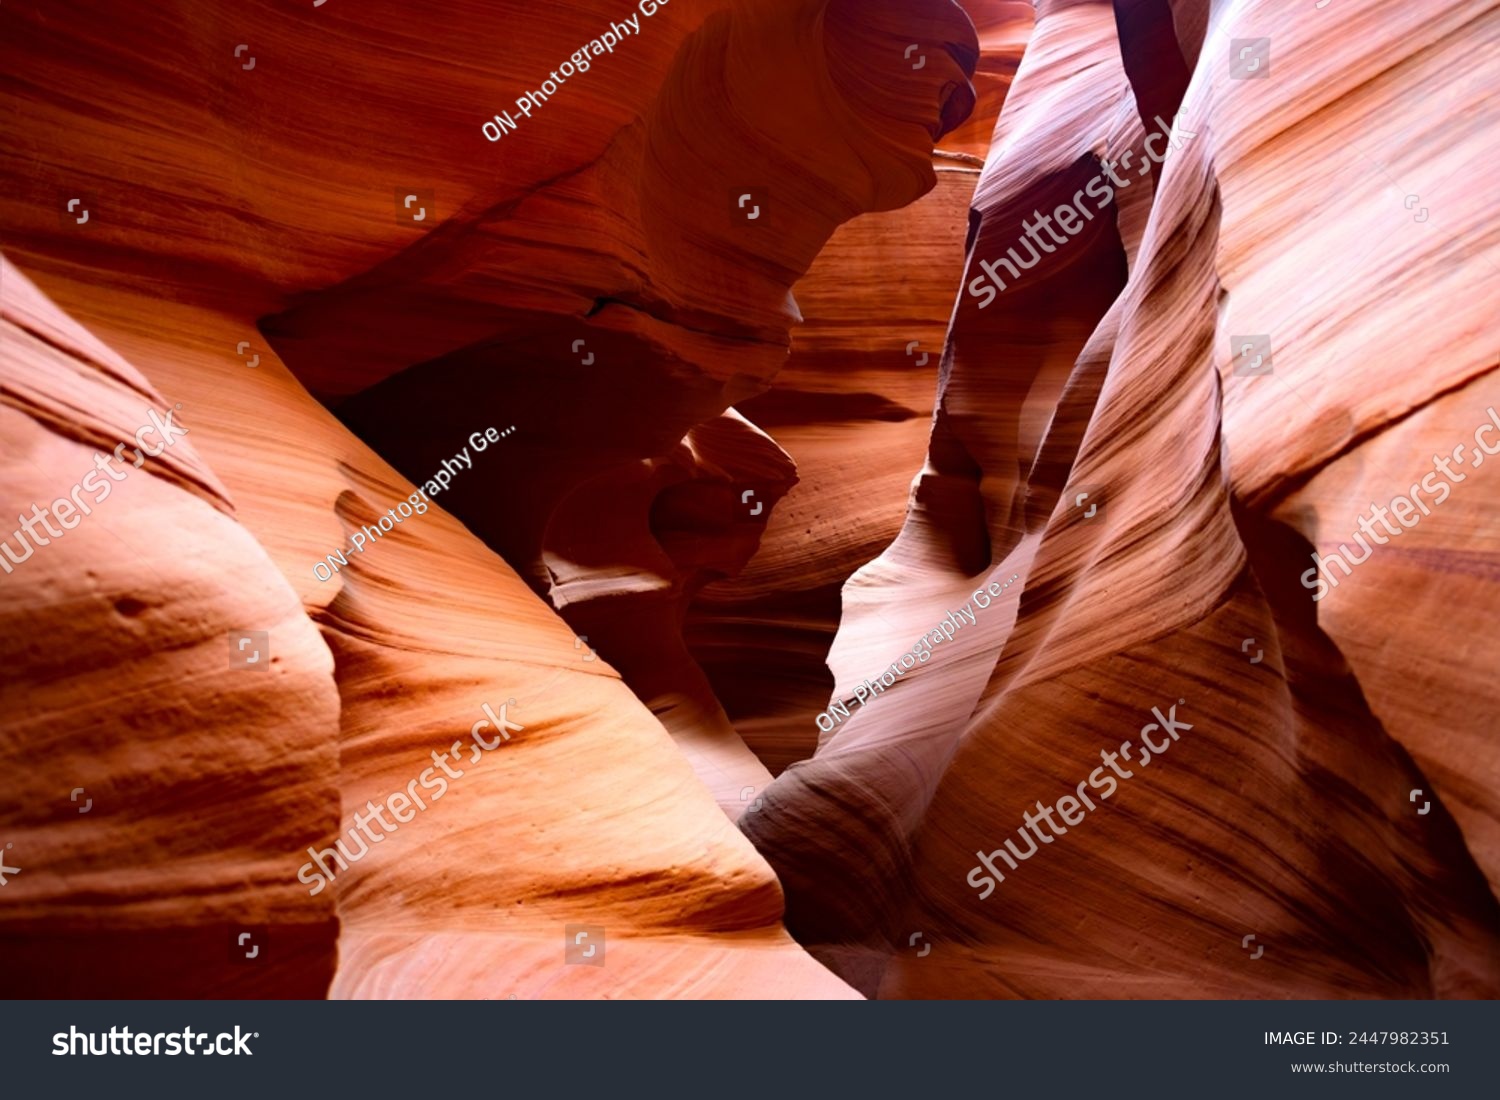 Antelope canyon in Arizona, USA is a natural wonder, magic place and tourist attraction formed by the power of erosion. Red-orange sandstone washed out by water in colorul shapes illuminated by sun. #2447982351